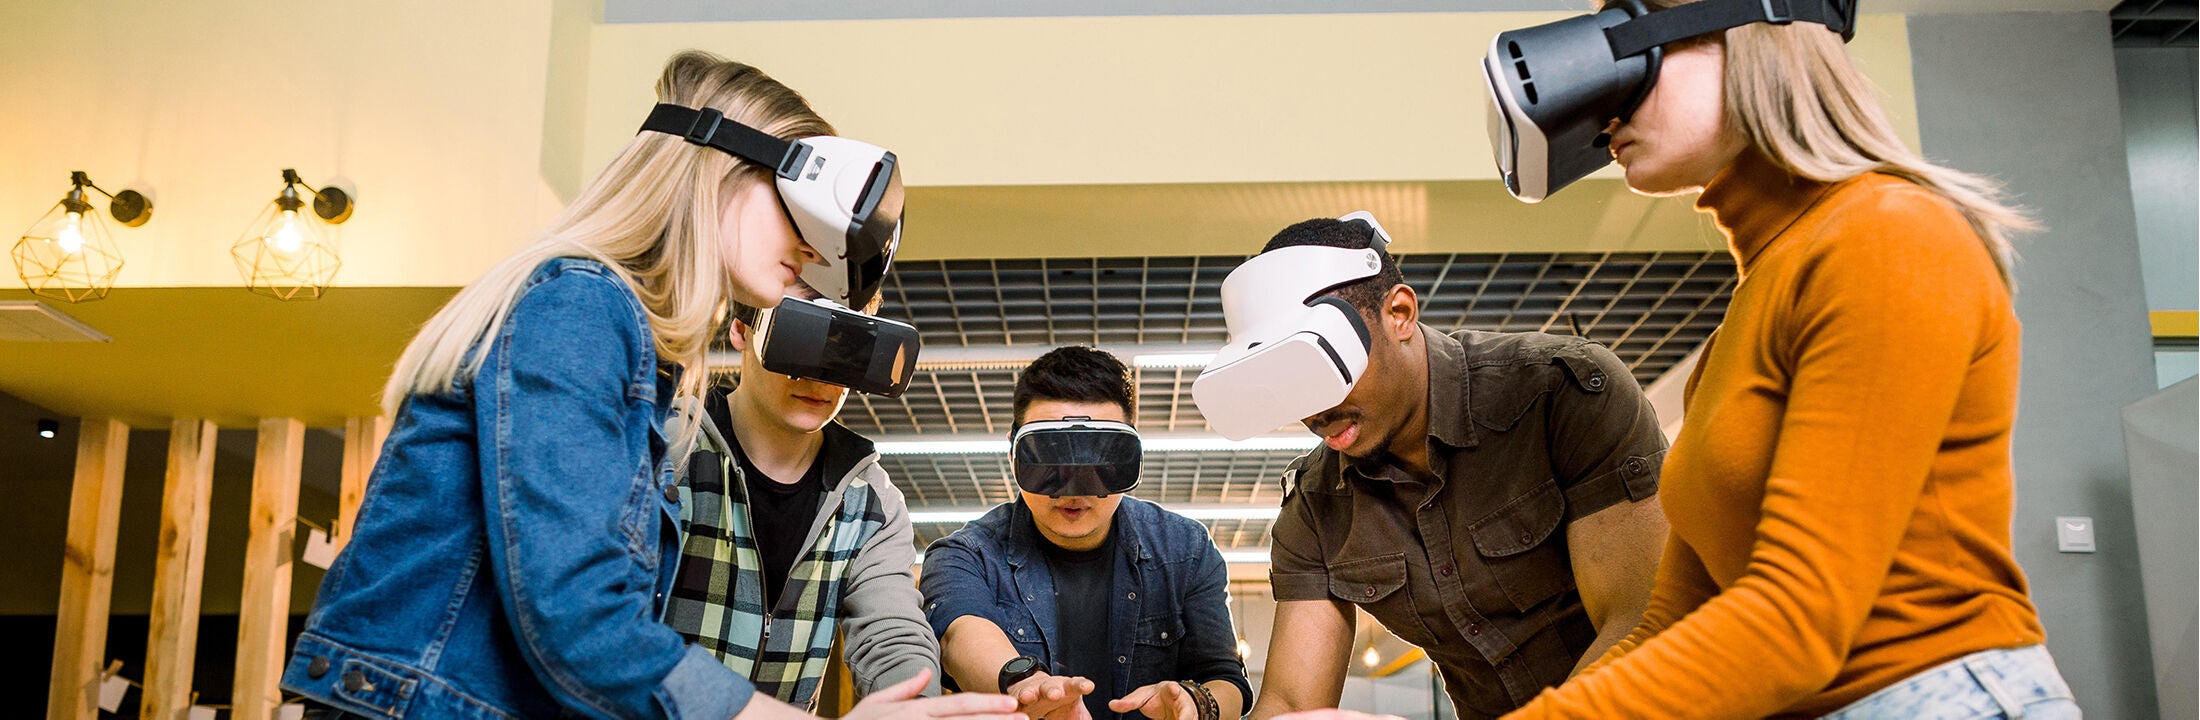 Students with VR glasses